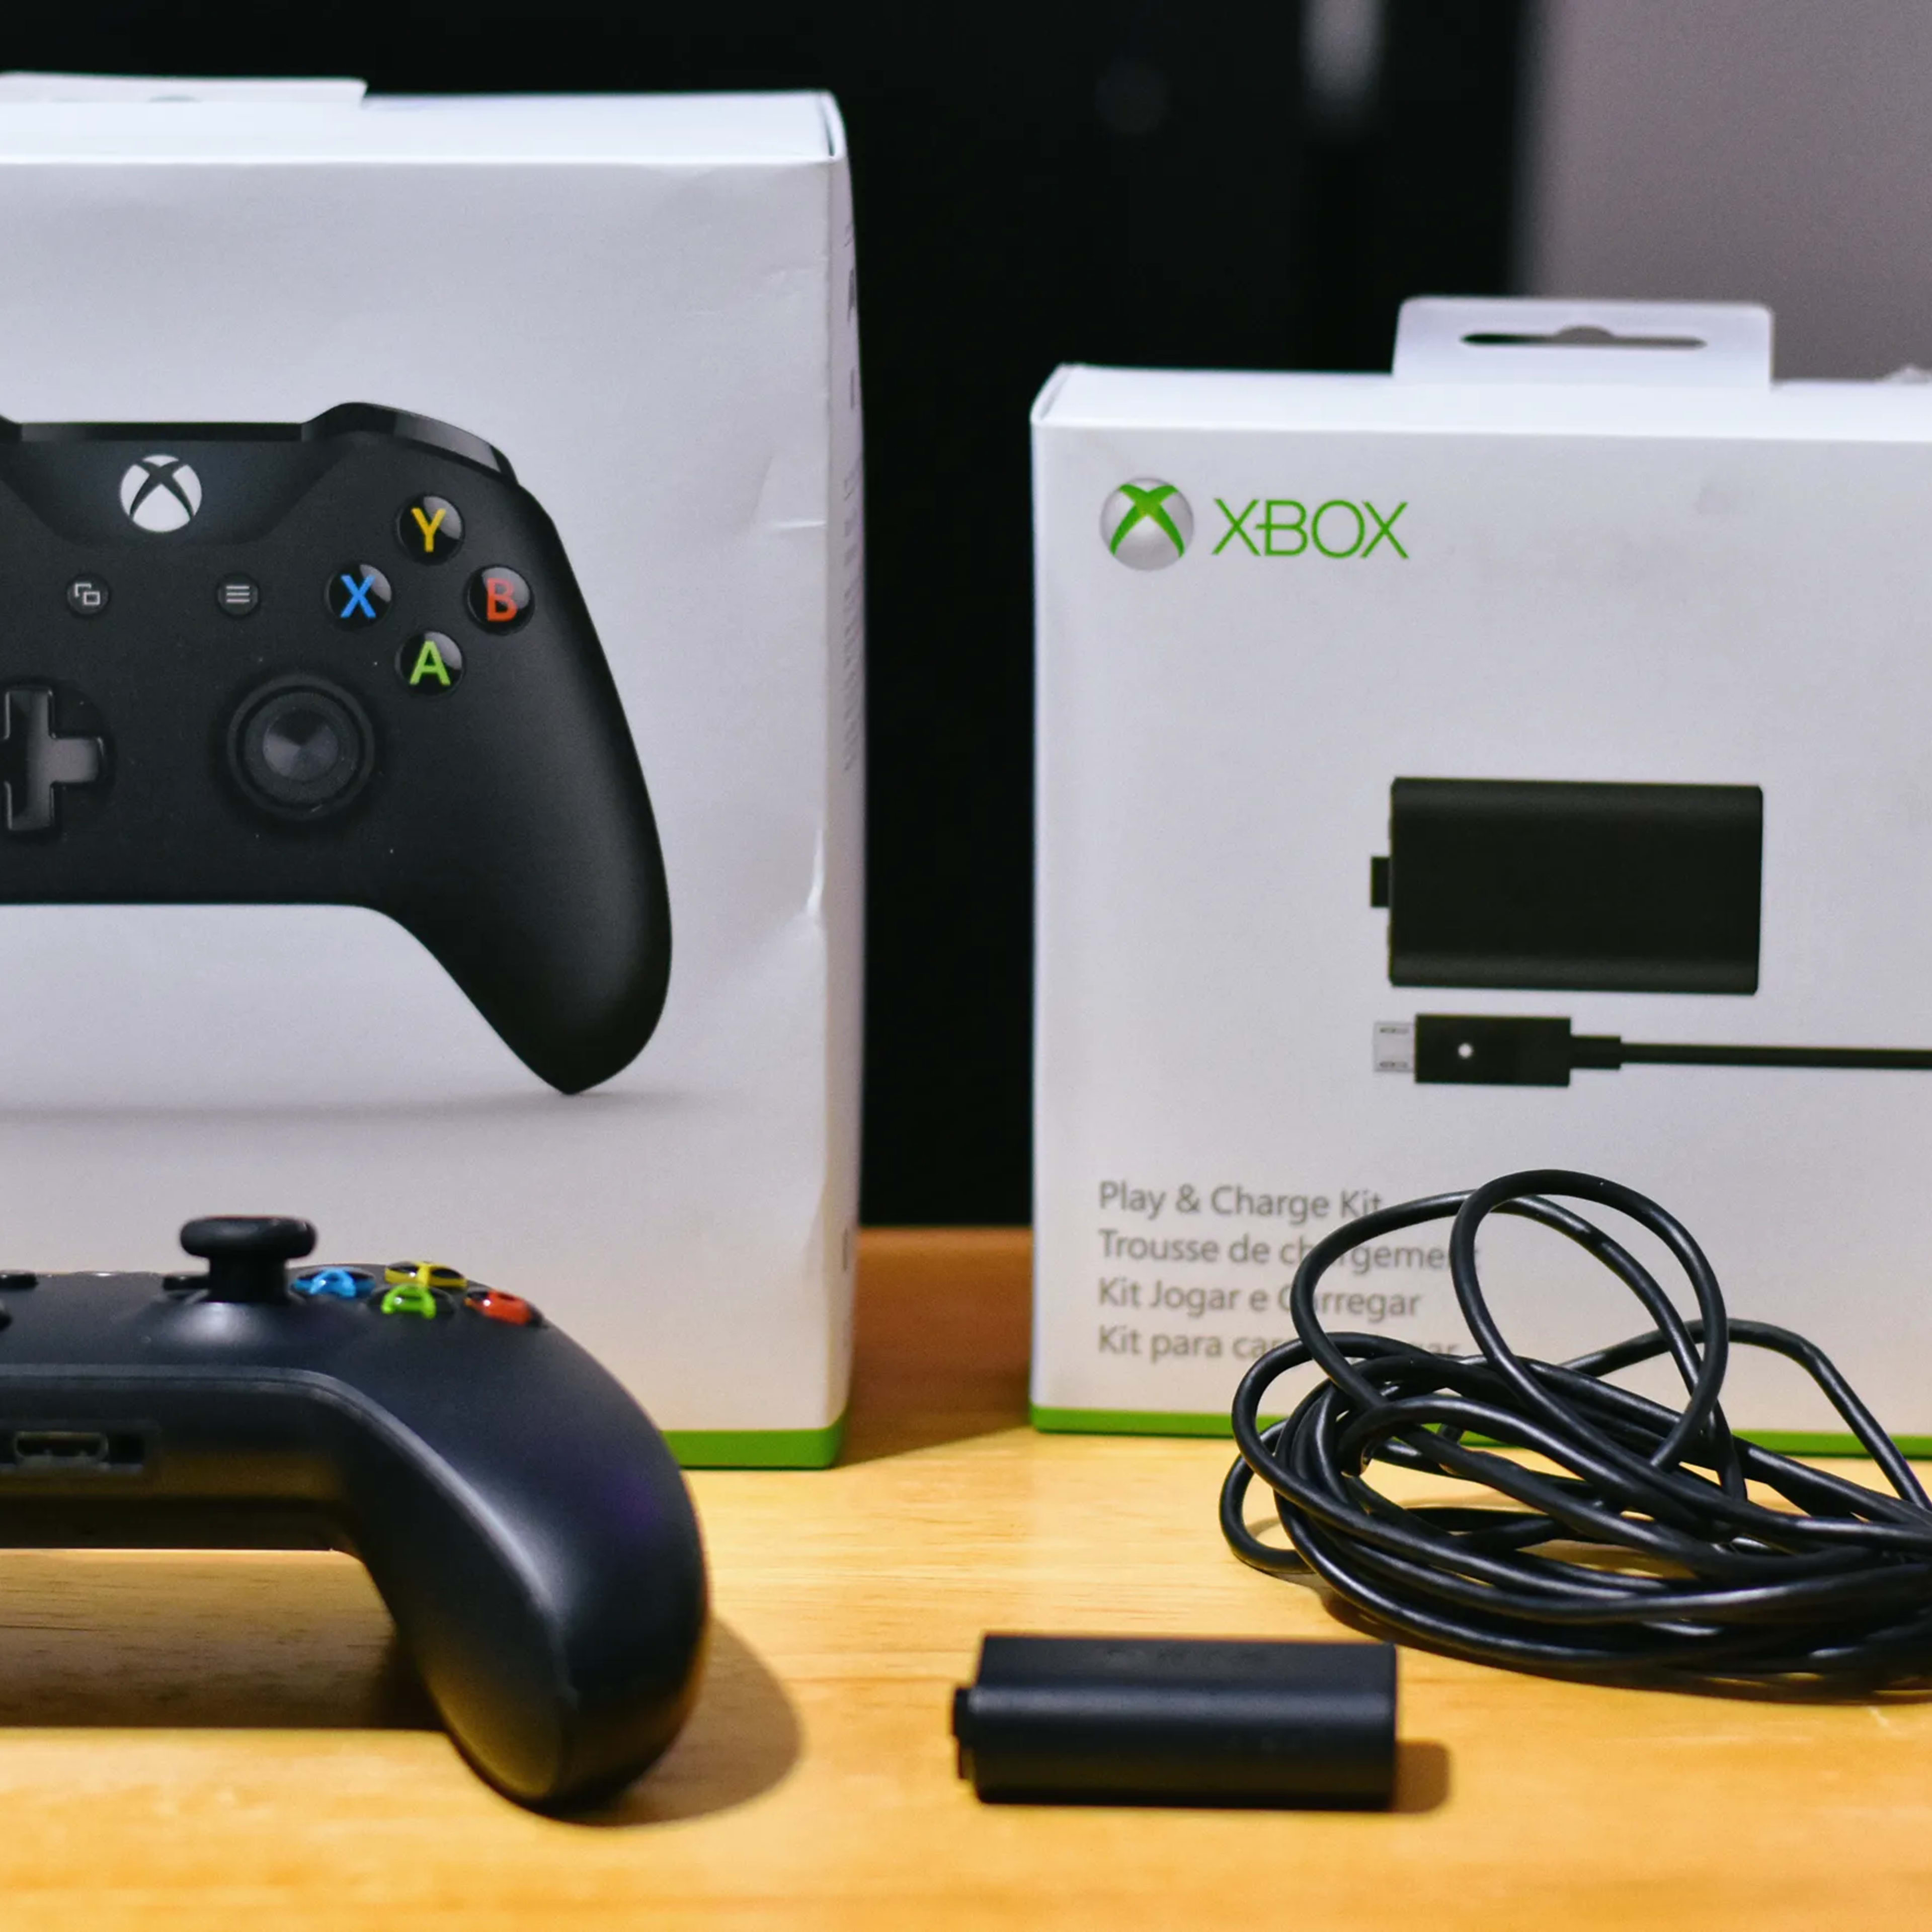 Xbox One Wireless Controller (Model 1708) Comes with Play and Charge Kit (previous model) - Black